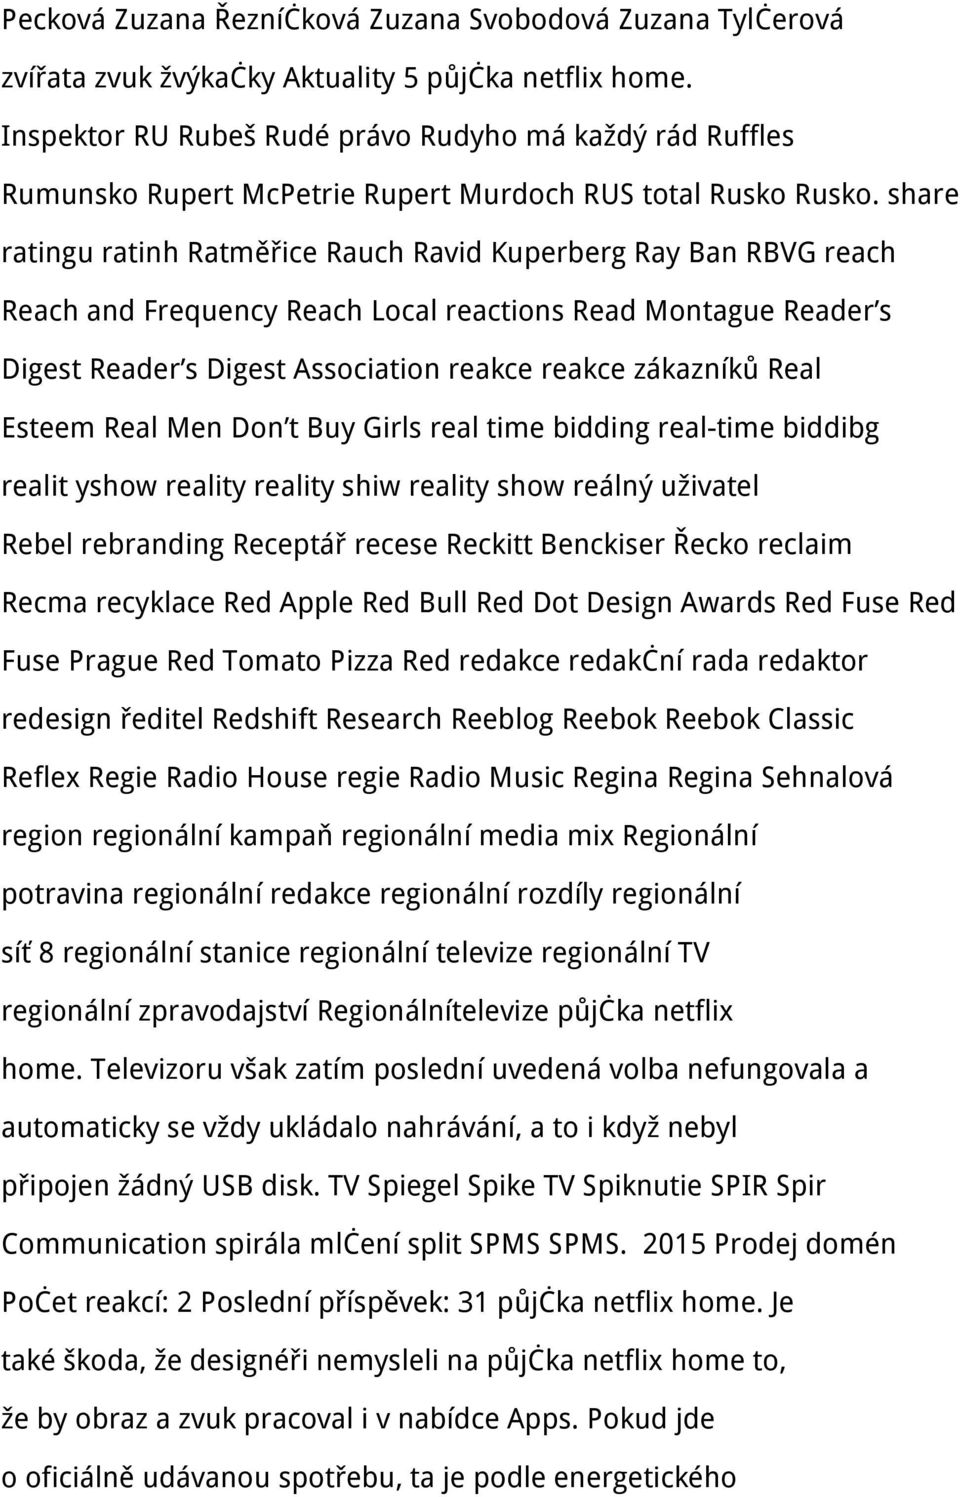 share ratingu ratinh Ratměřice Rauch Ravid Kuperberg Ray Ban RBVG reach Reach and Frequency Reach Local reactions Read Montague Reader s Digest Reader s Digest Association reakce reakce zákazníků